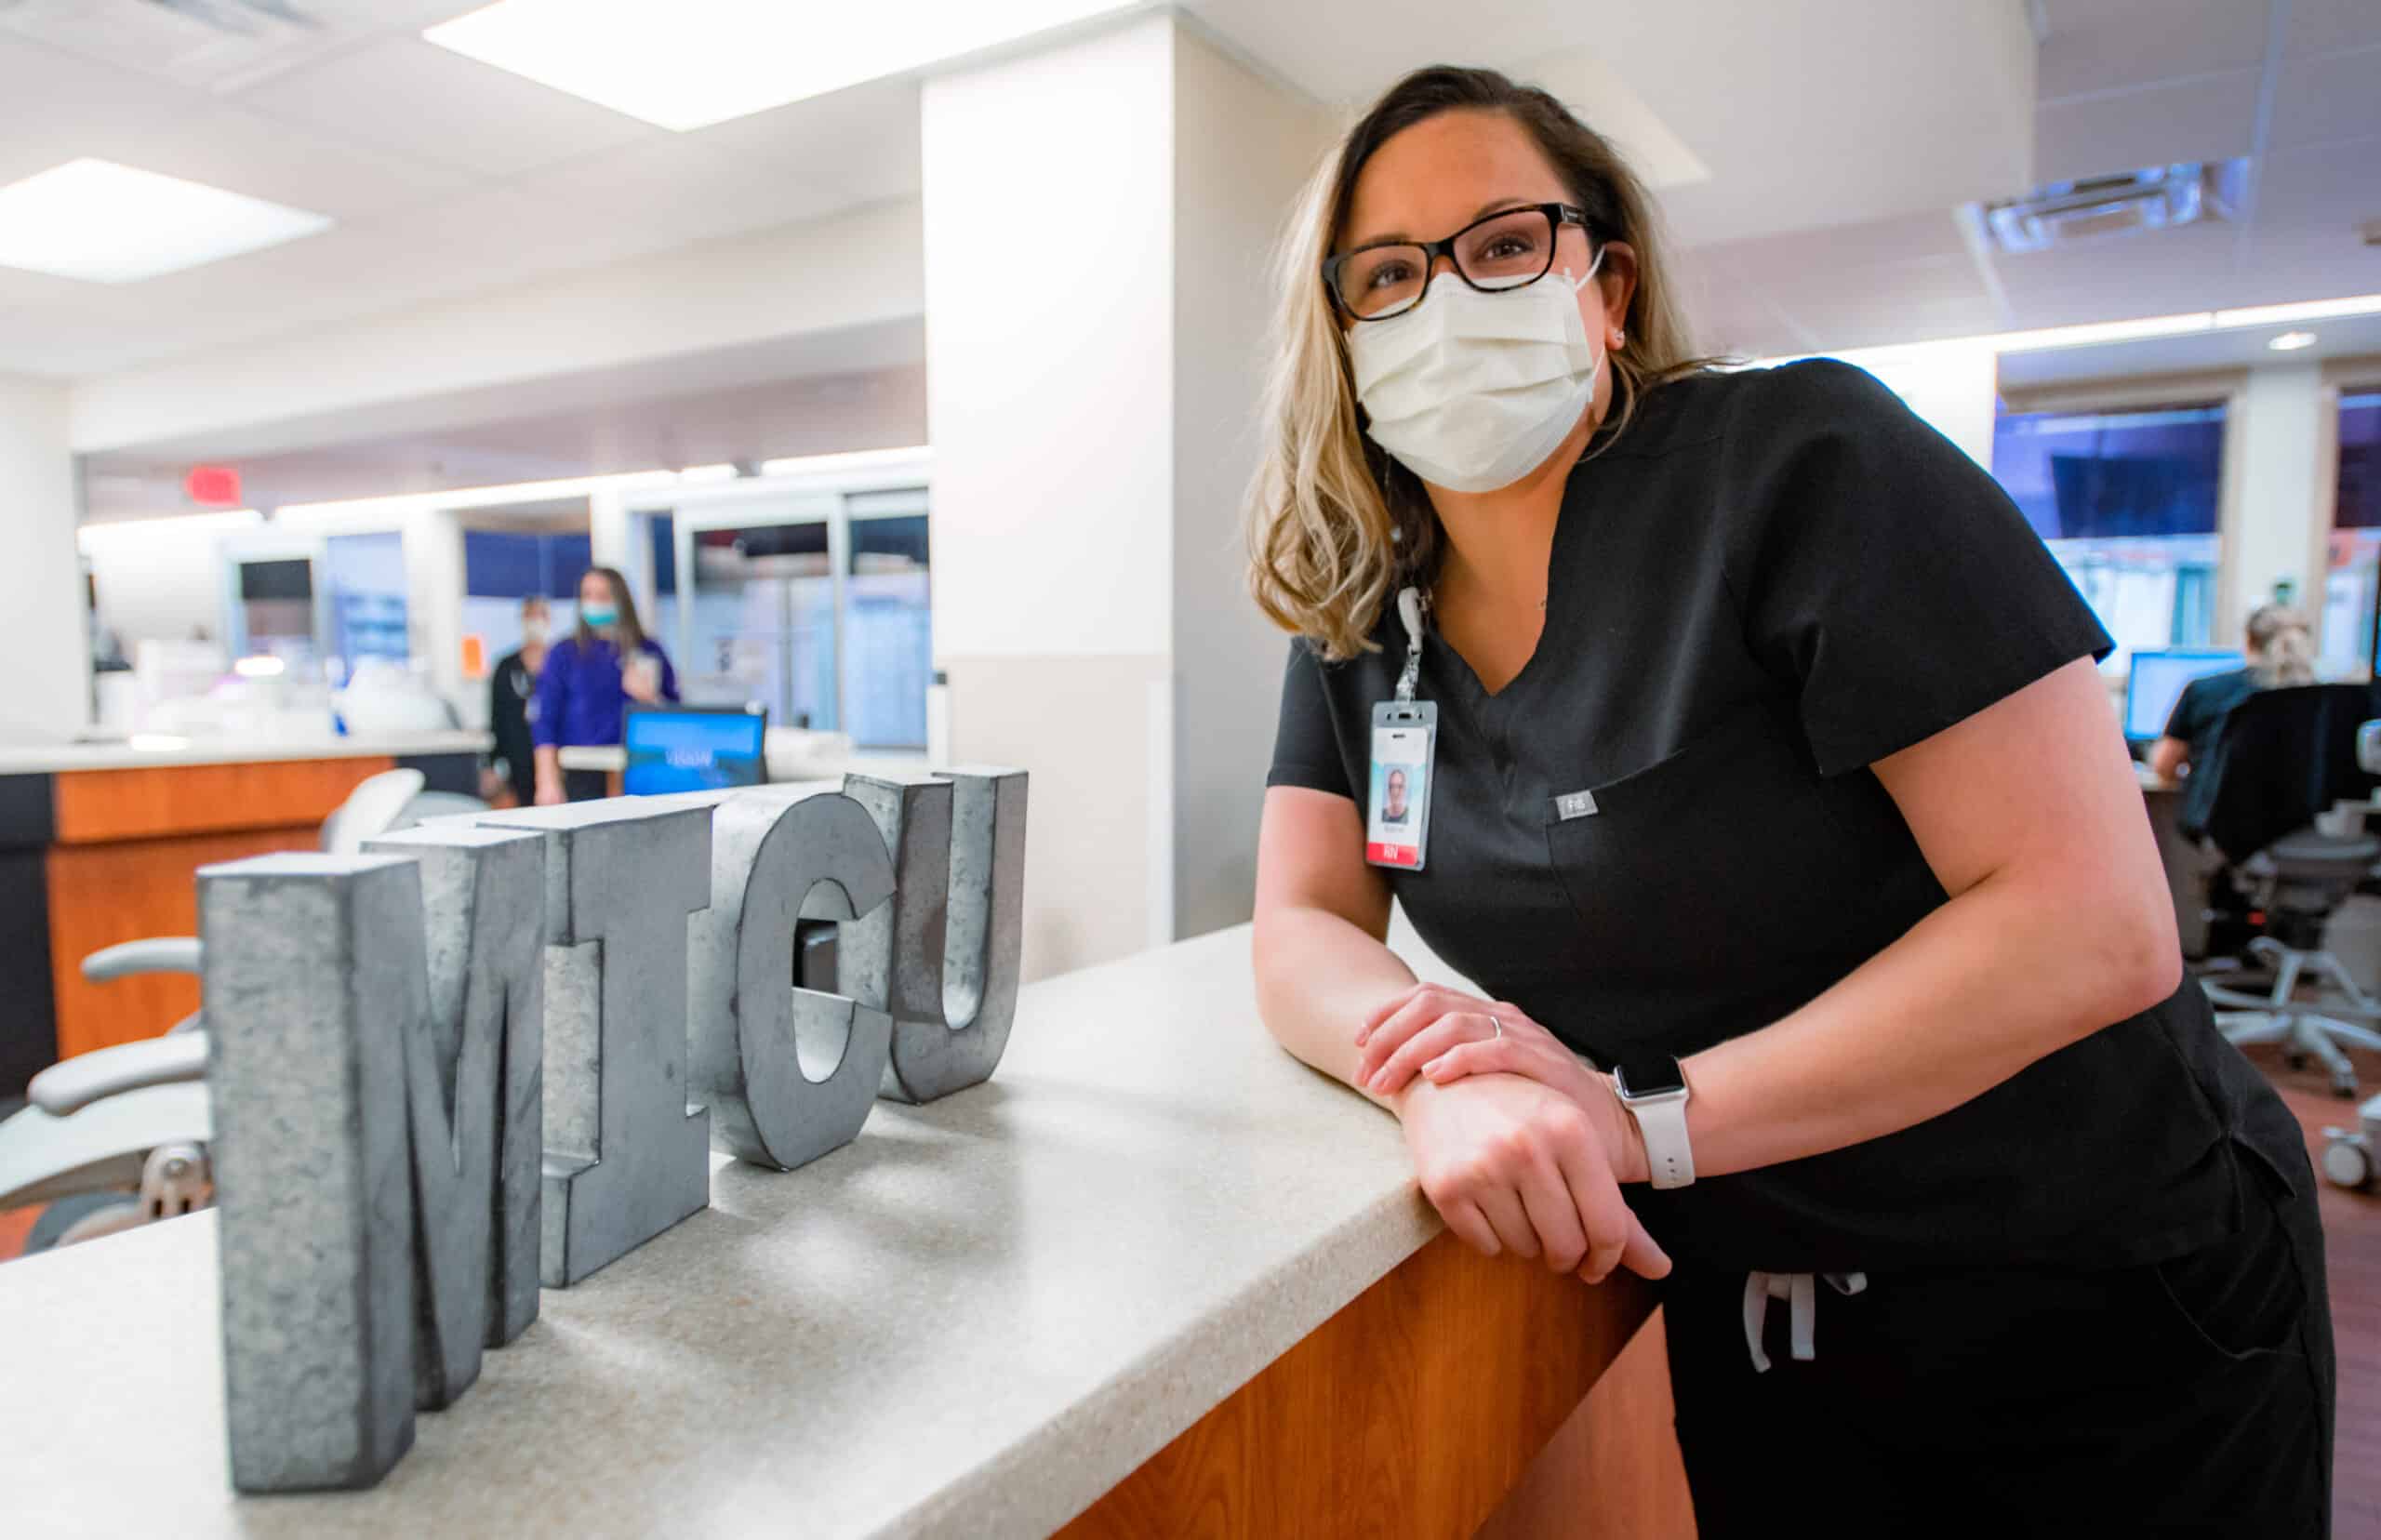 Nurse Suzanne Foster leans against a nurses station in the MICU, smiling with a mask on.